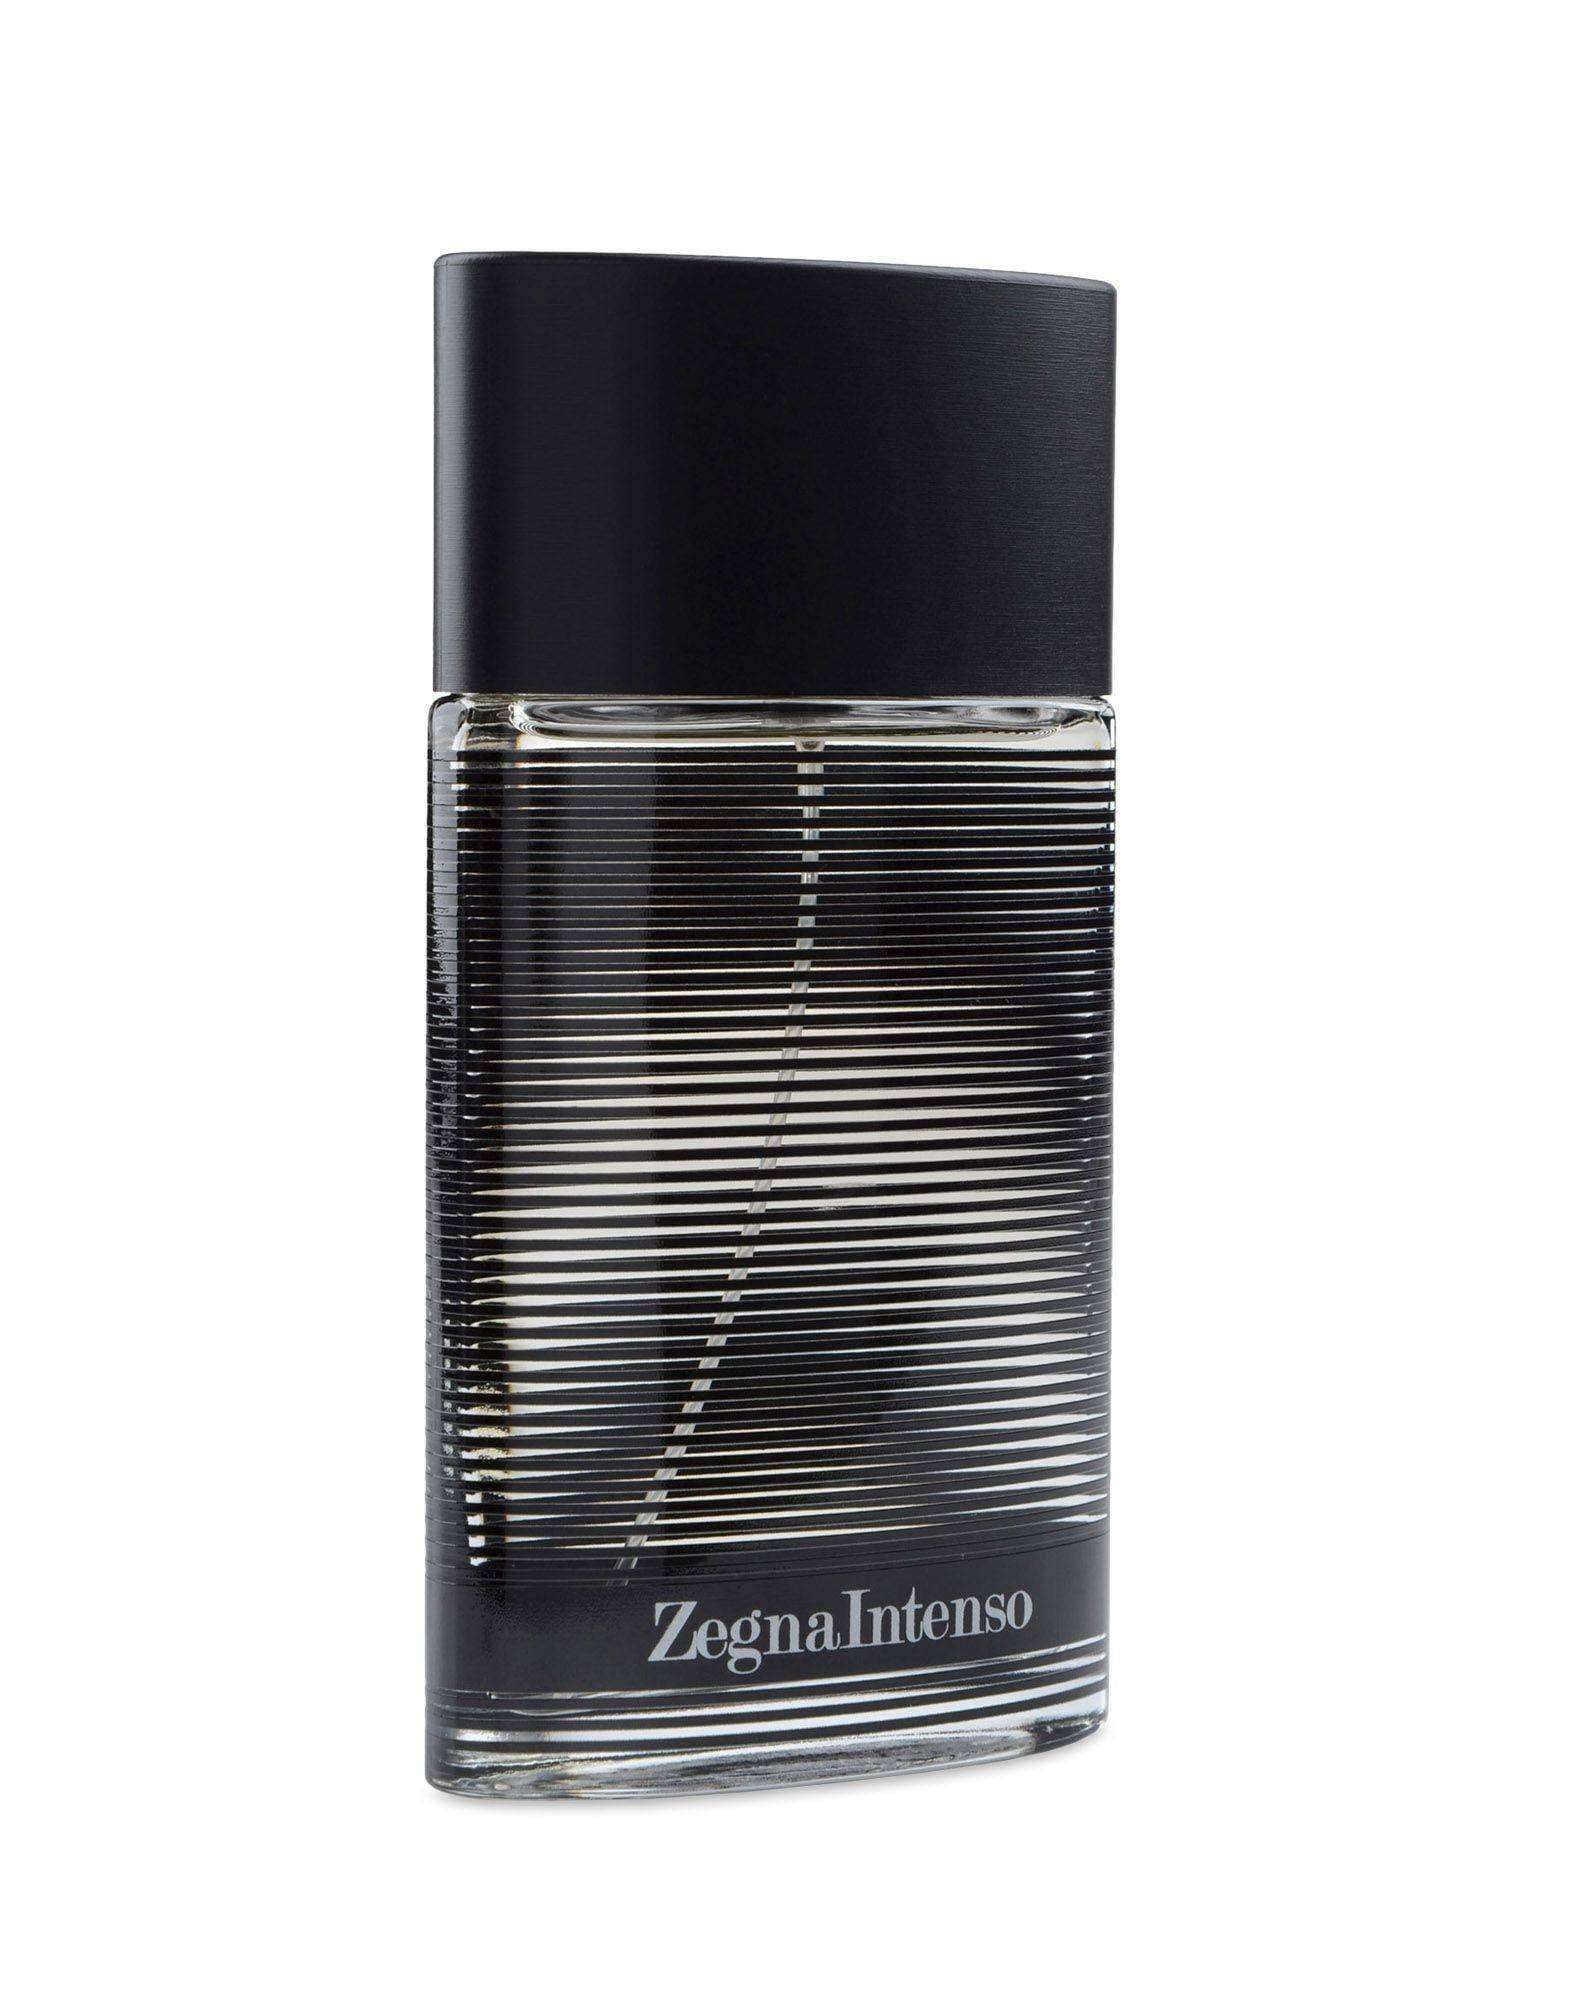 Zegna Intenso - tester | Buy Perfume Online | My Perfume Shop